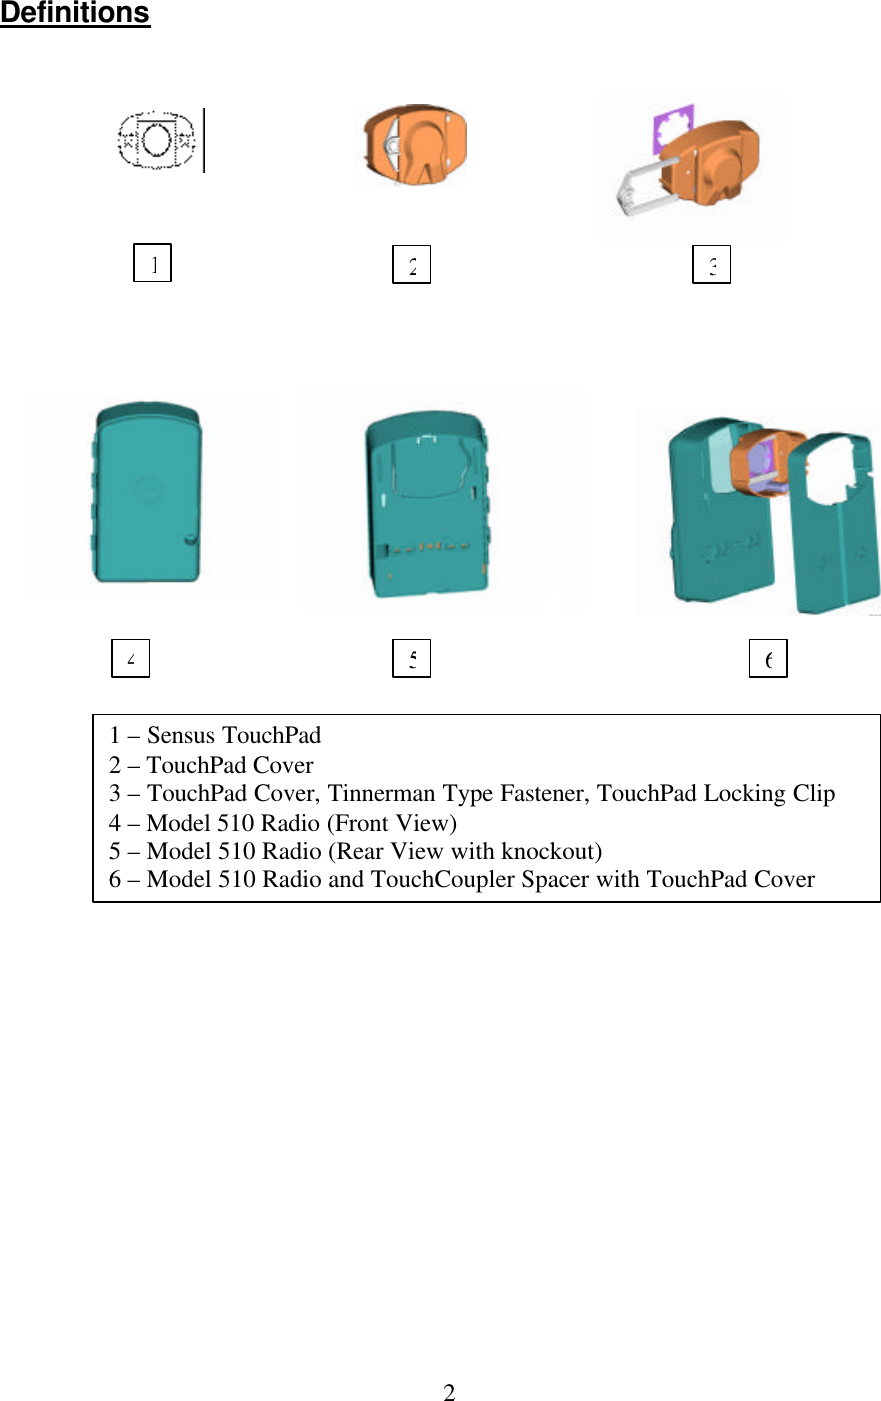  2Definitions         1 – Sensus TouchPad 2 – TouchPad Cover 3 – TouchPad Cover, Tinnerman Type Fastener, TouchPad Locking Clip 4 – Model 510 Radio (Front View) 5 – Model 510 Radio (Rear View with knockout) 6 – Model 510 Radio and TouchCoupler Spacer with TouchPad Cover 123456